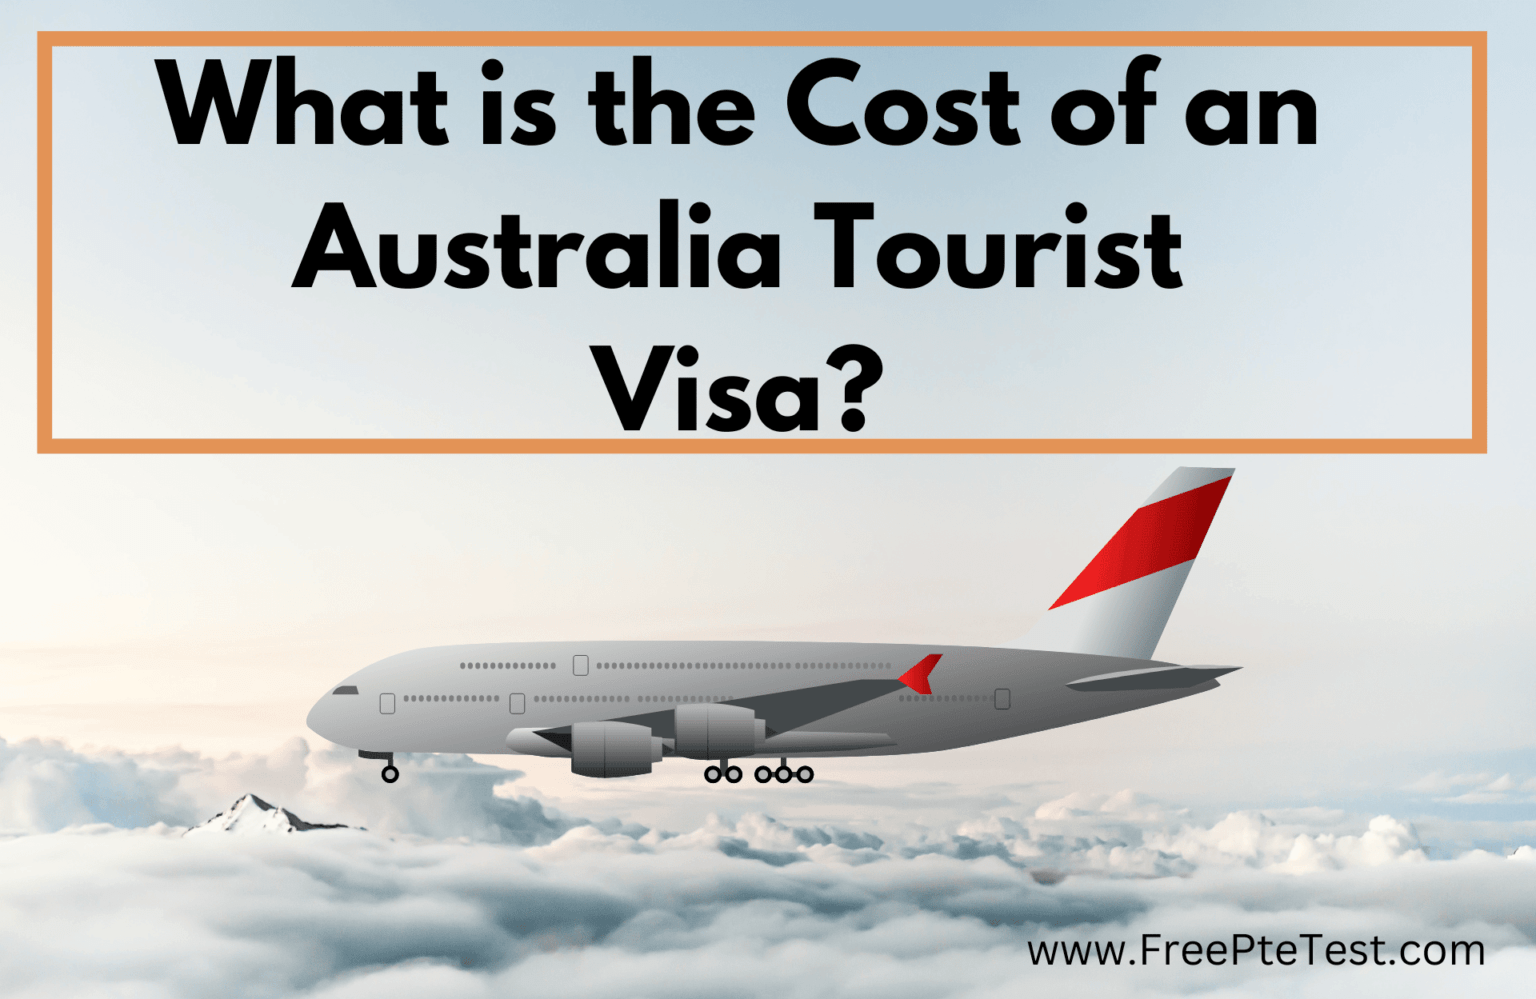 What is the Cost of an Australia Tourist Visa?